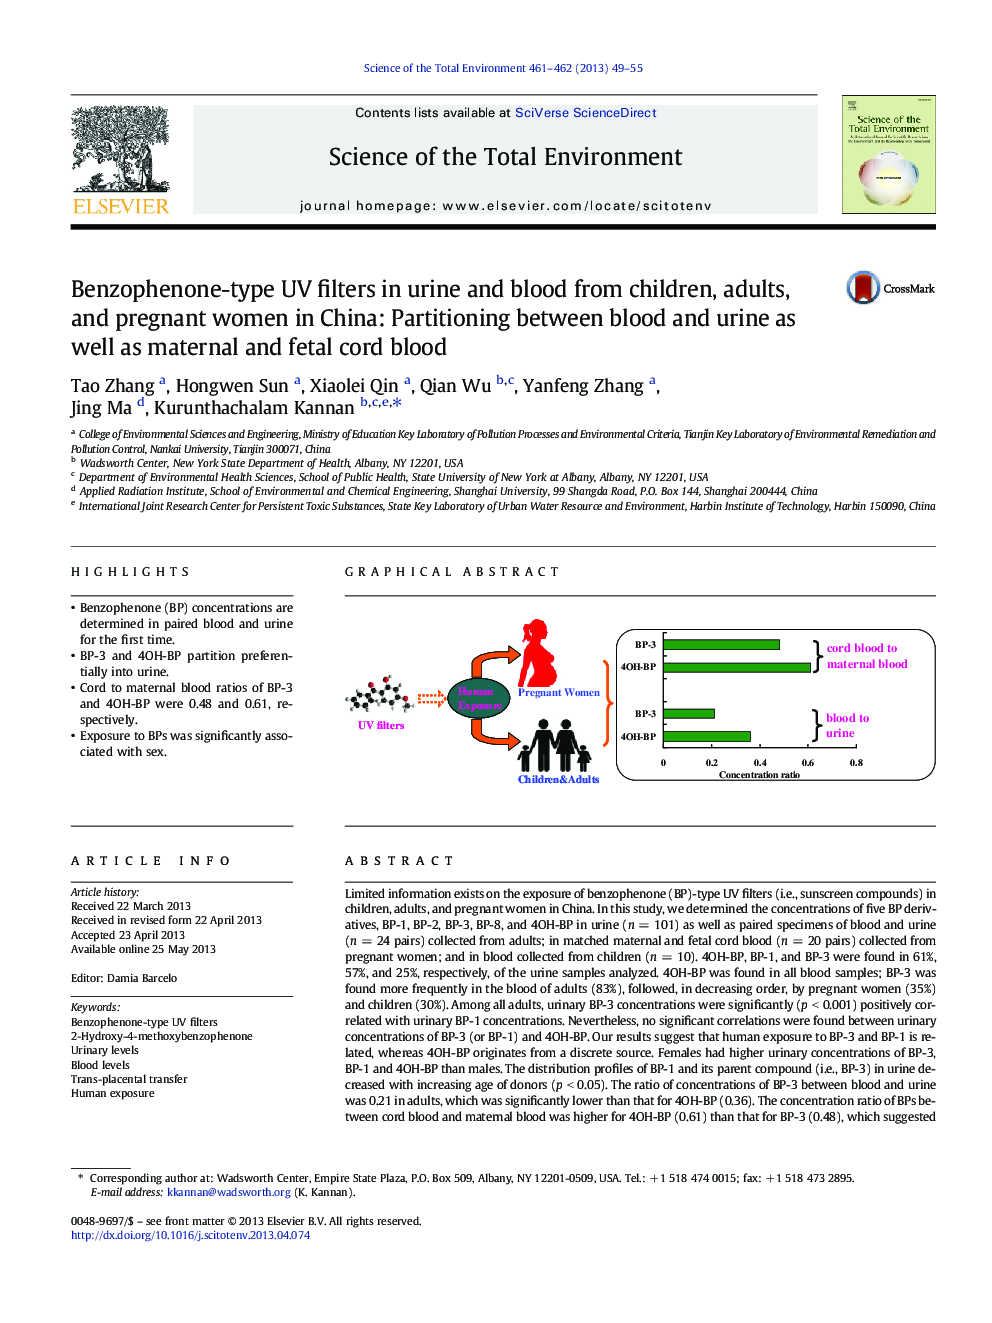 Benzophenone-type UV filters in urine and blood from children, adults, and pregnant women in China: Partitioning between blood and urine as well as maternal and fetal cord blood